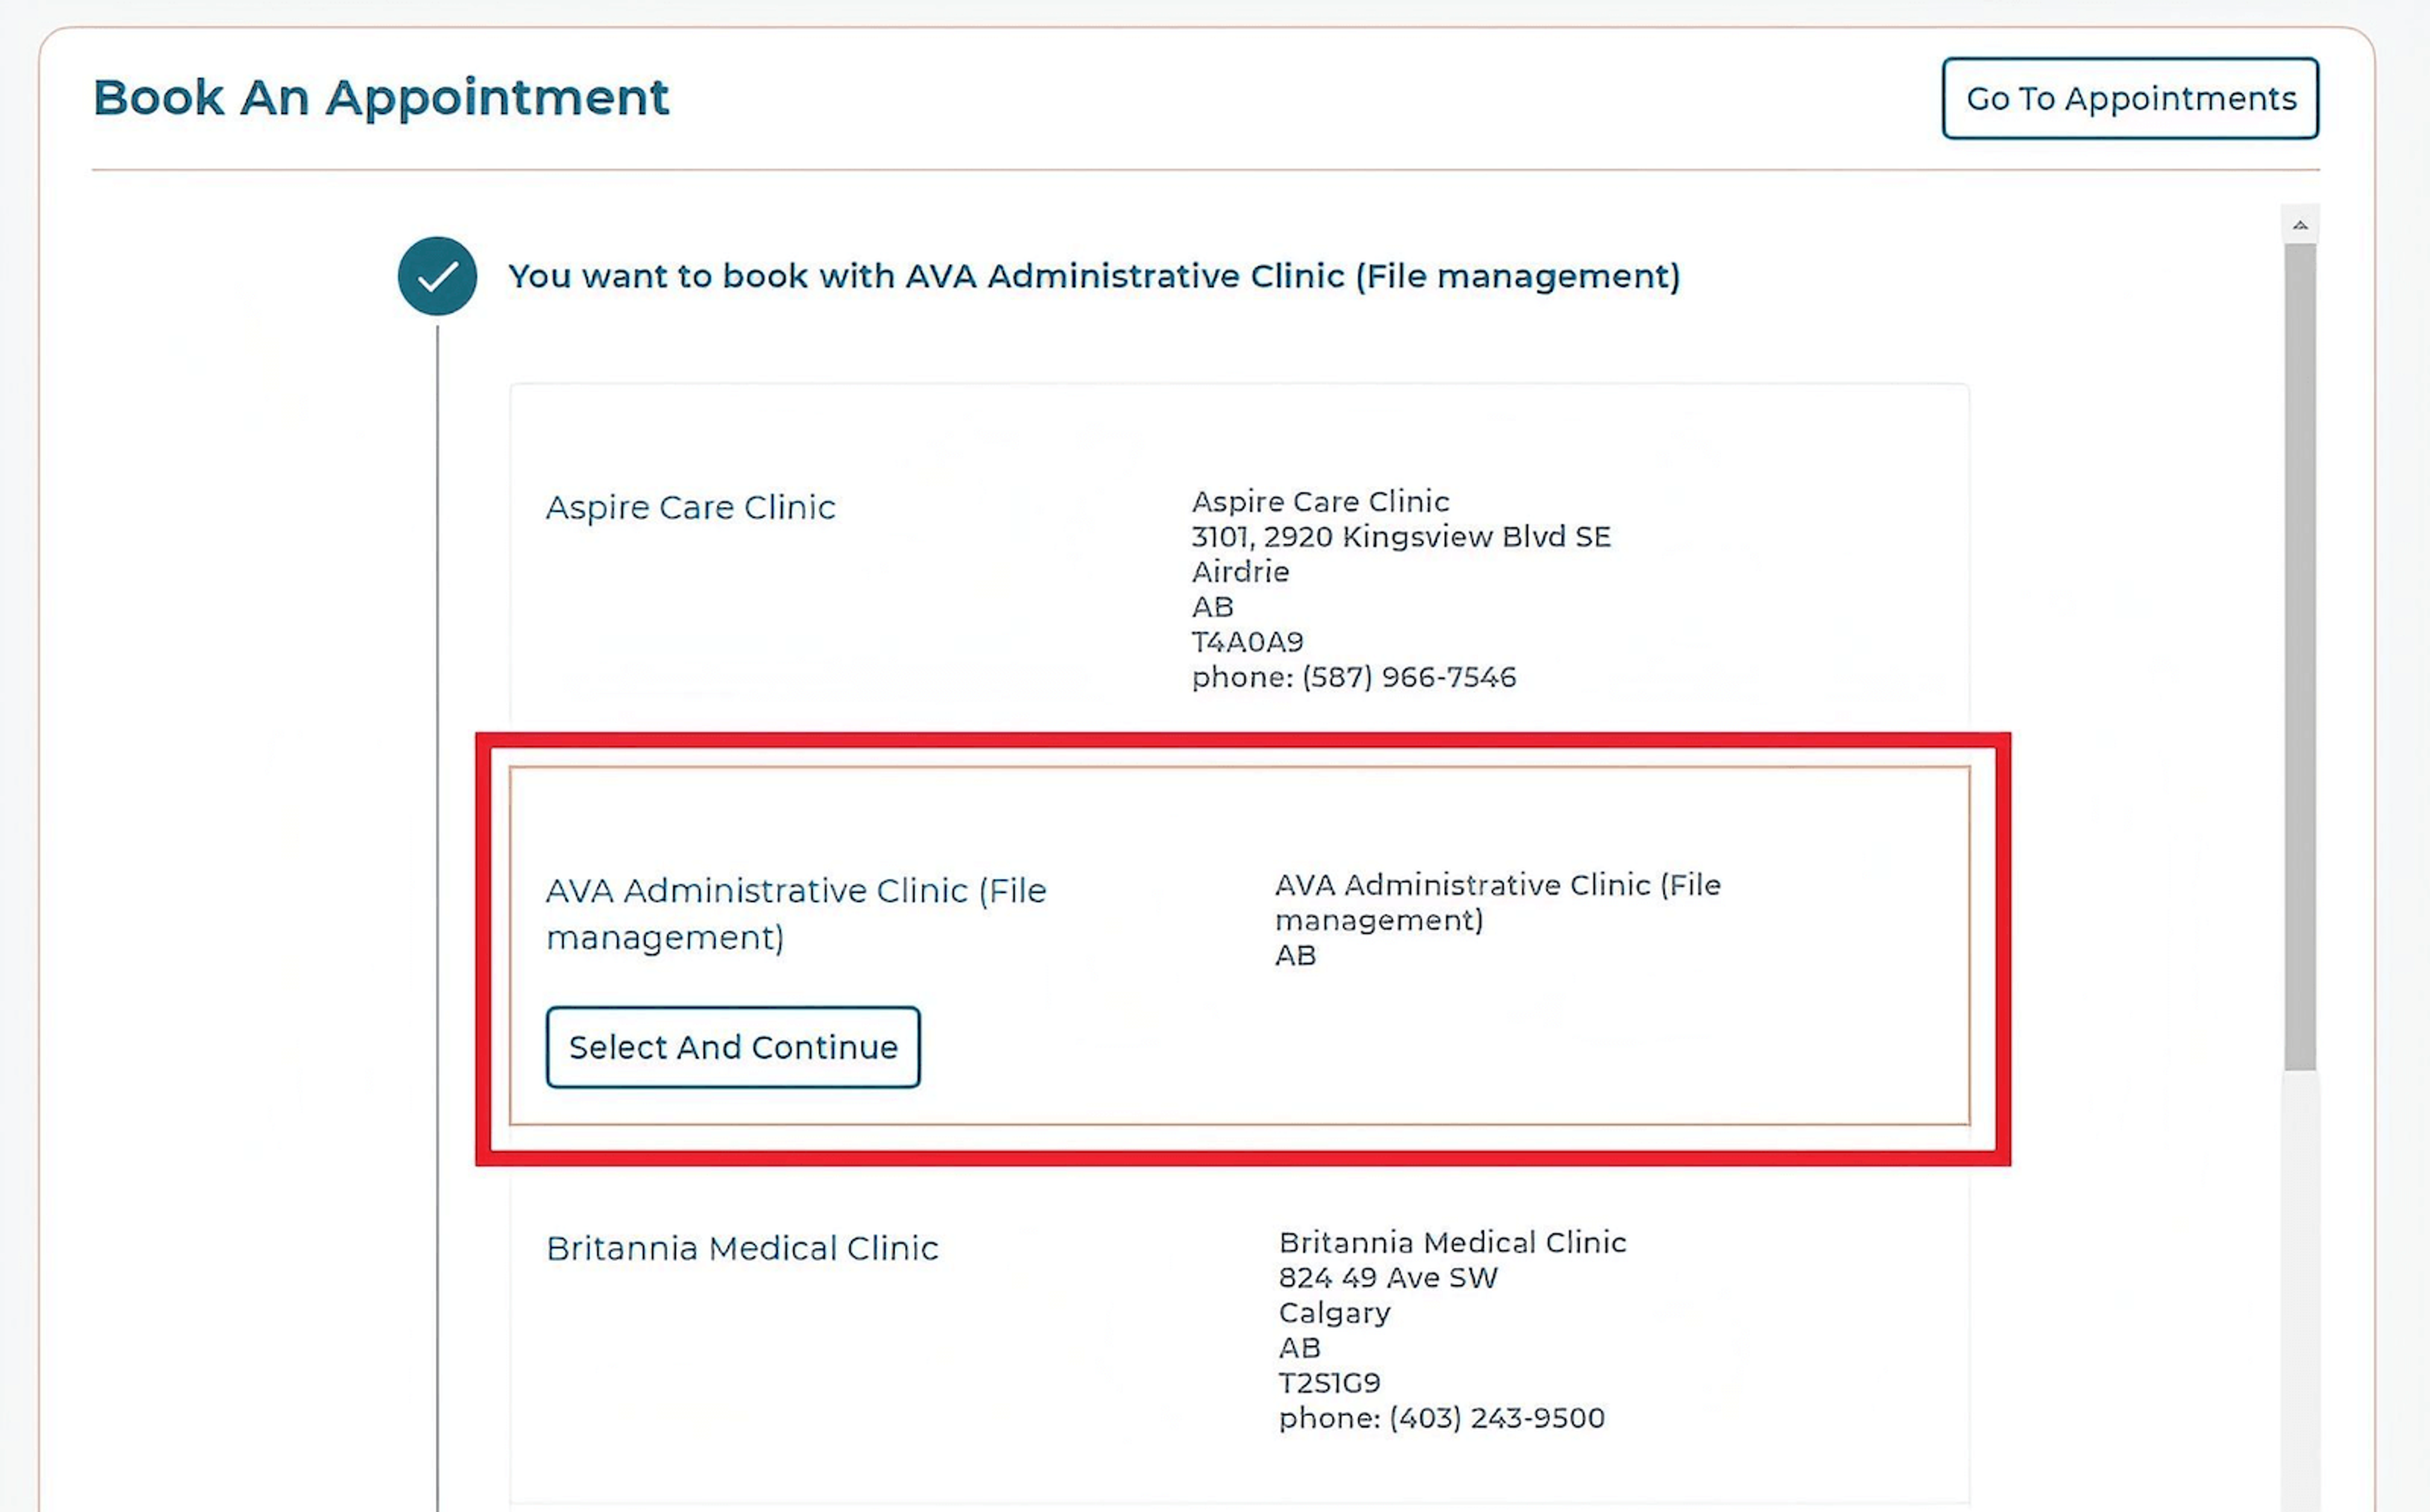 Book an Appointment workspace with a red rectangle around the Ava Administrative Clinic (File management) section.